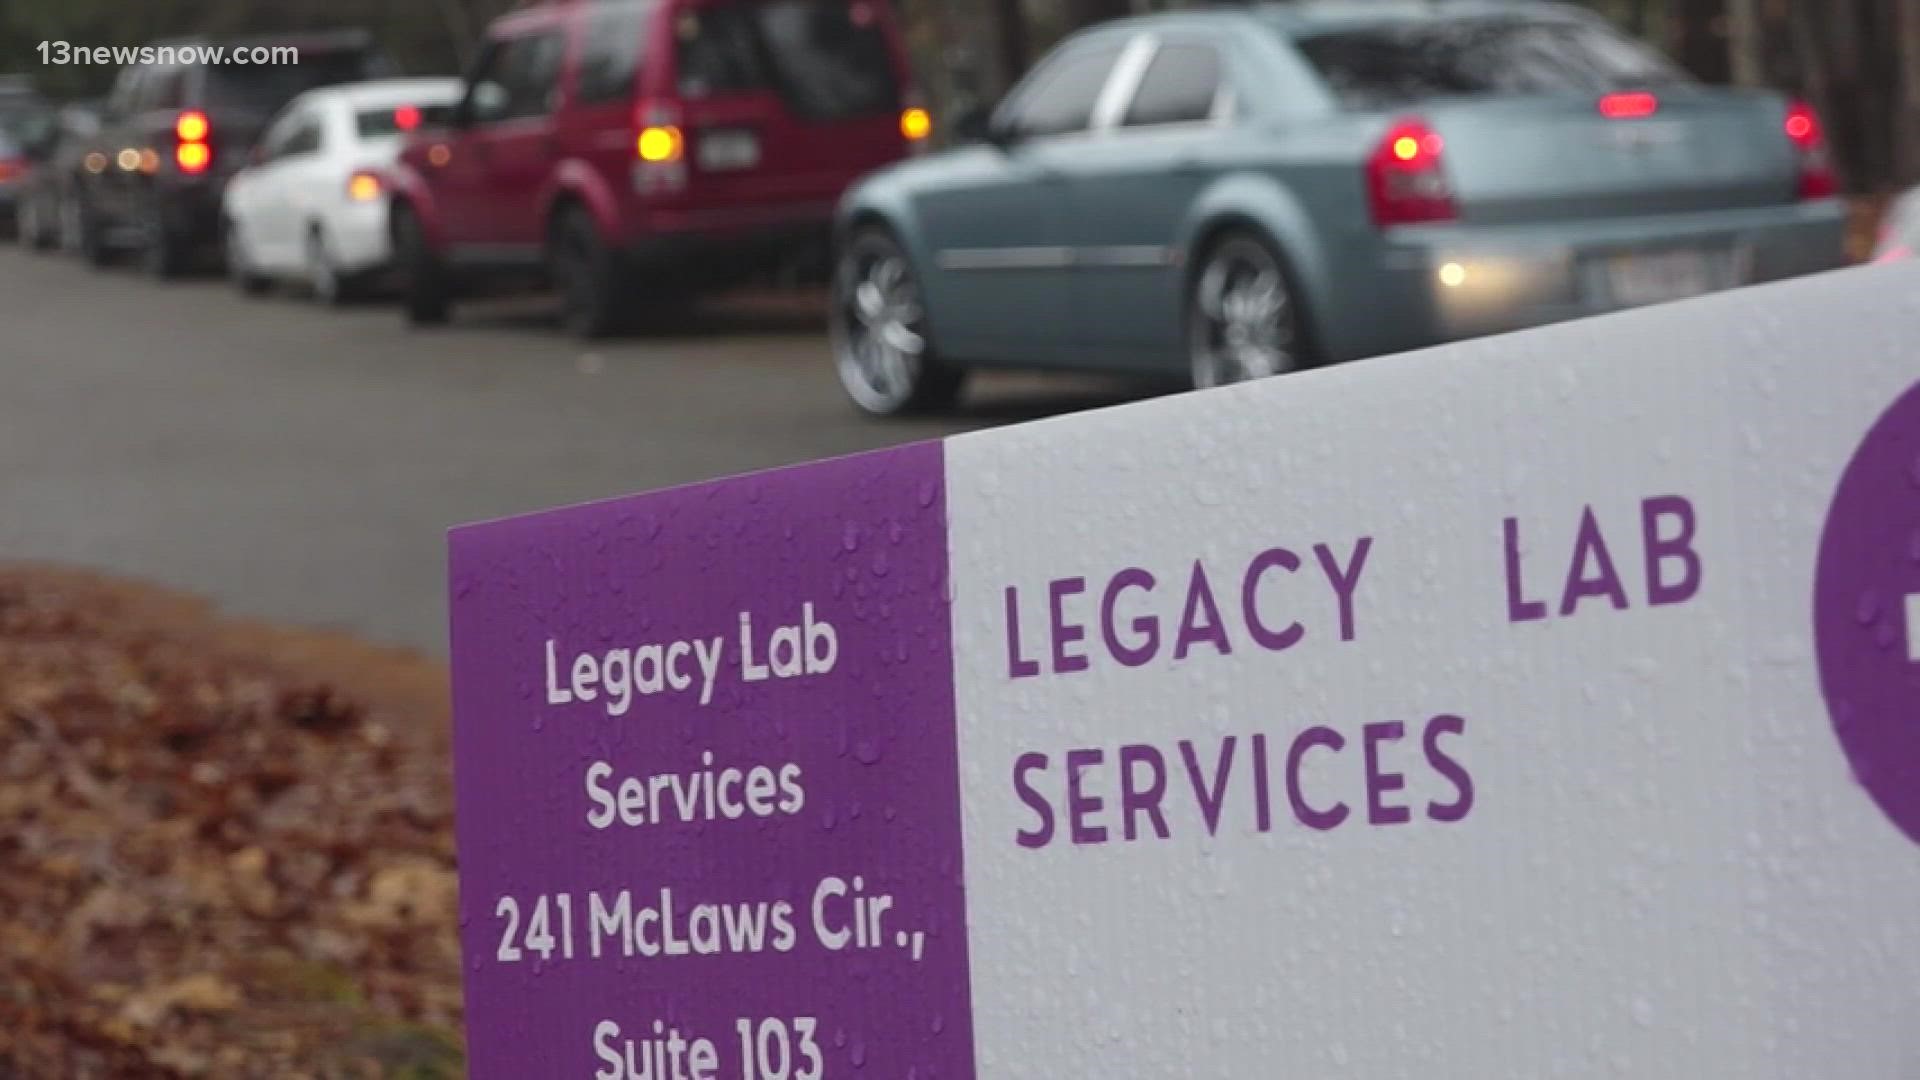 People are driving from New Kent to Legacy Labs in Williamsburg in hopes of getting tested. The demand is overwhelming this independent lab with a staff of 7 people.